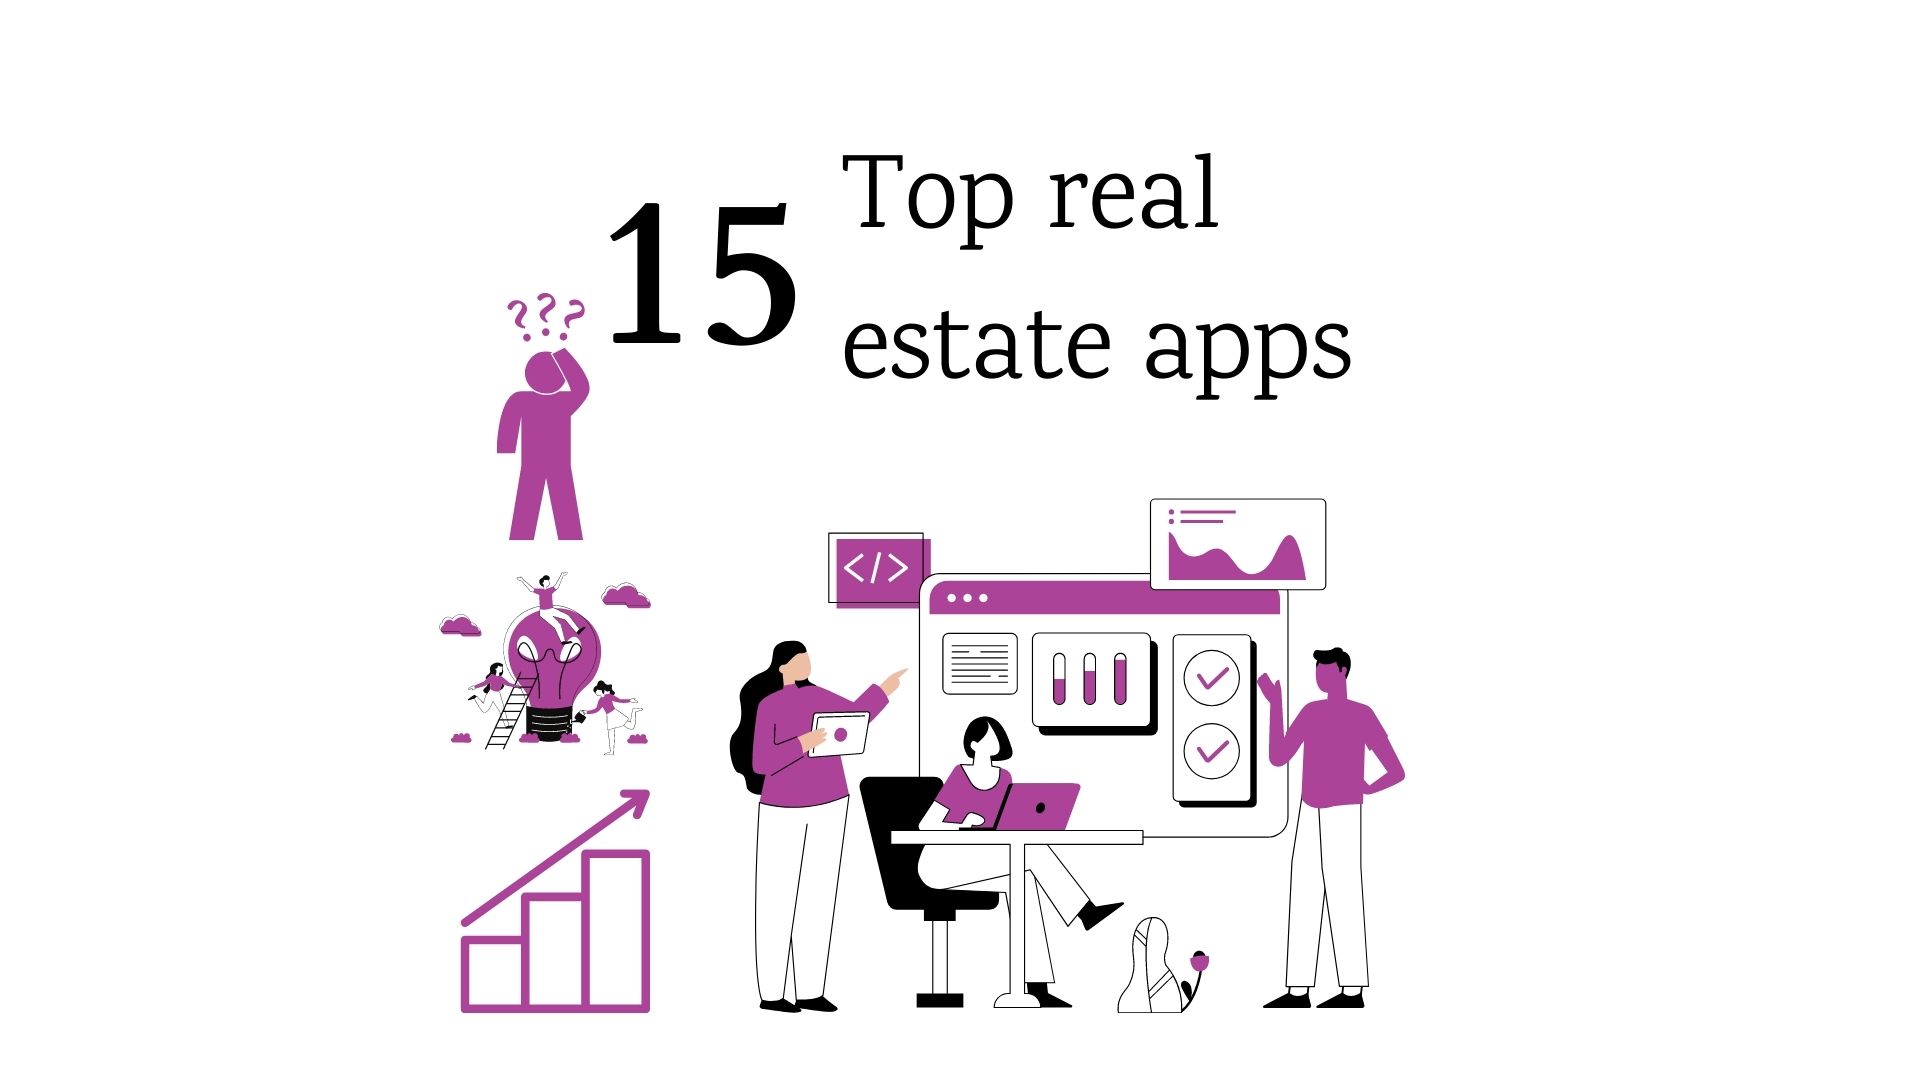 The 15 Top real estate apps that investors should know